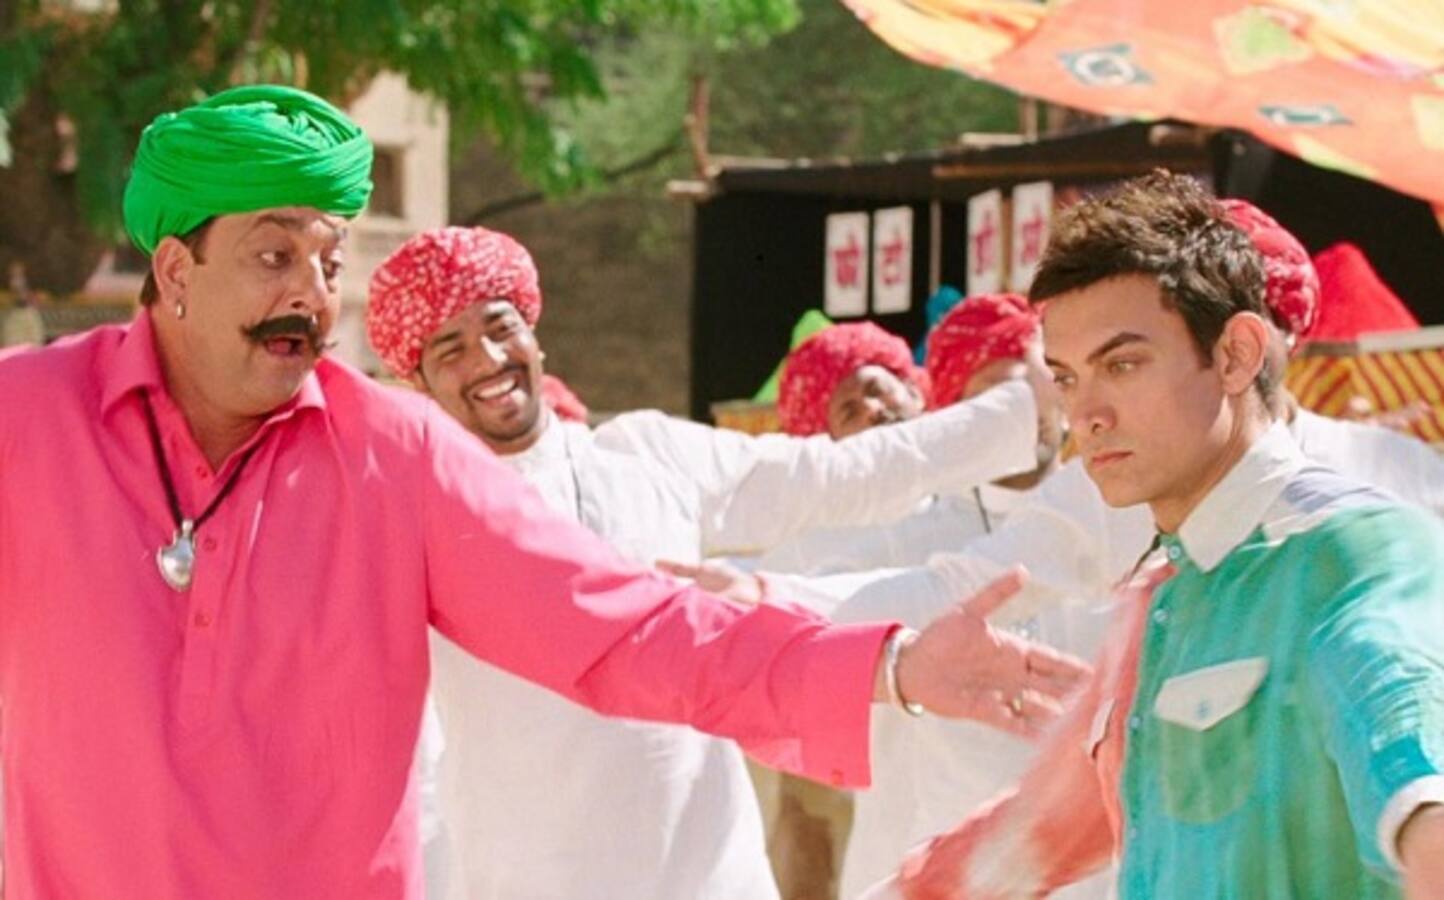 PK song teaser Tharki Chokro : A curious Aamir Khan reveals his naughty side in this charming song!